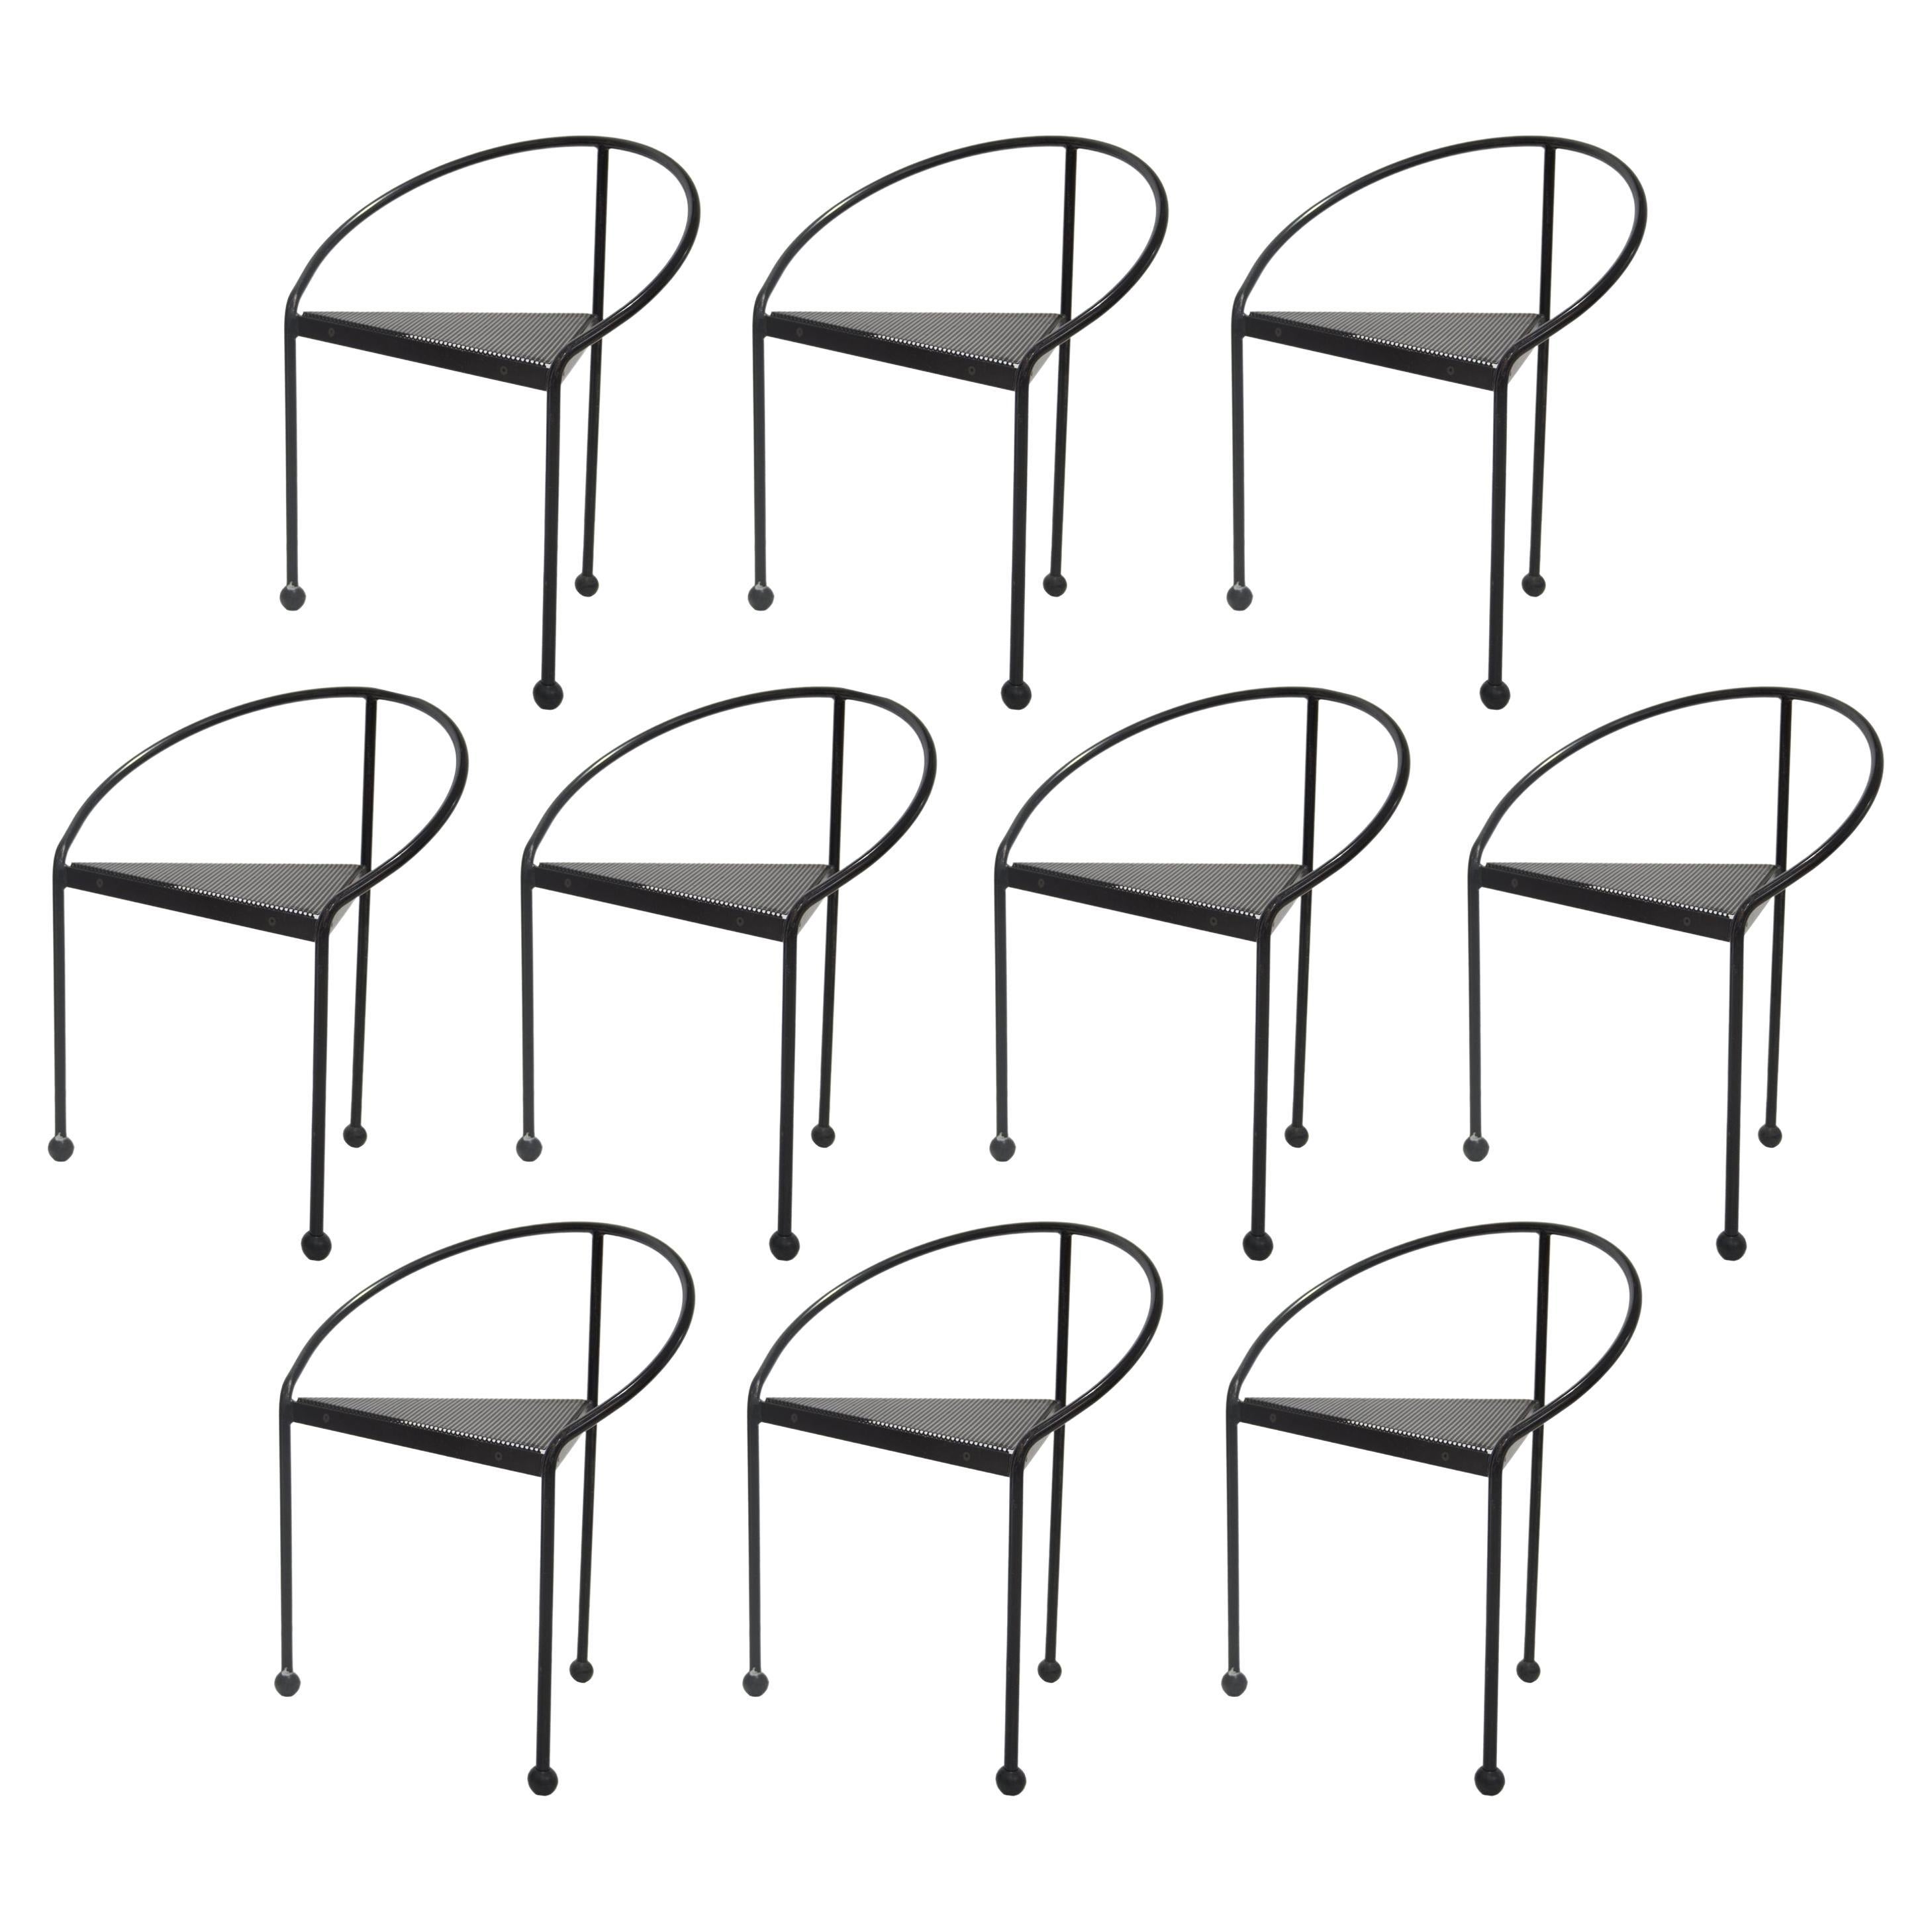 Set of Ten "Bermuda" Chairs Designed by Carlos Miret for Amat, Spain, 1986 For Sale